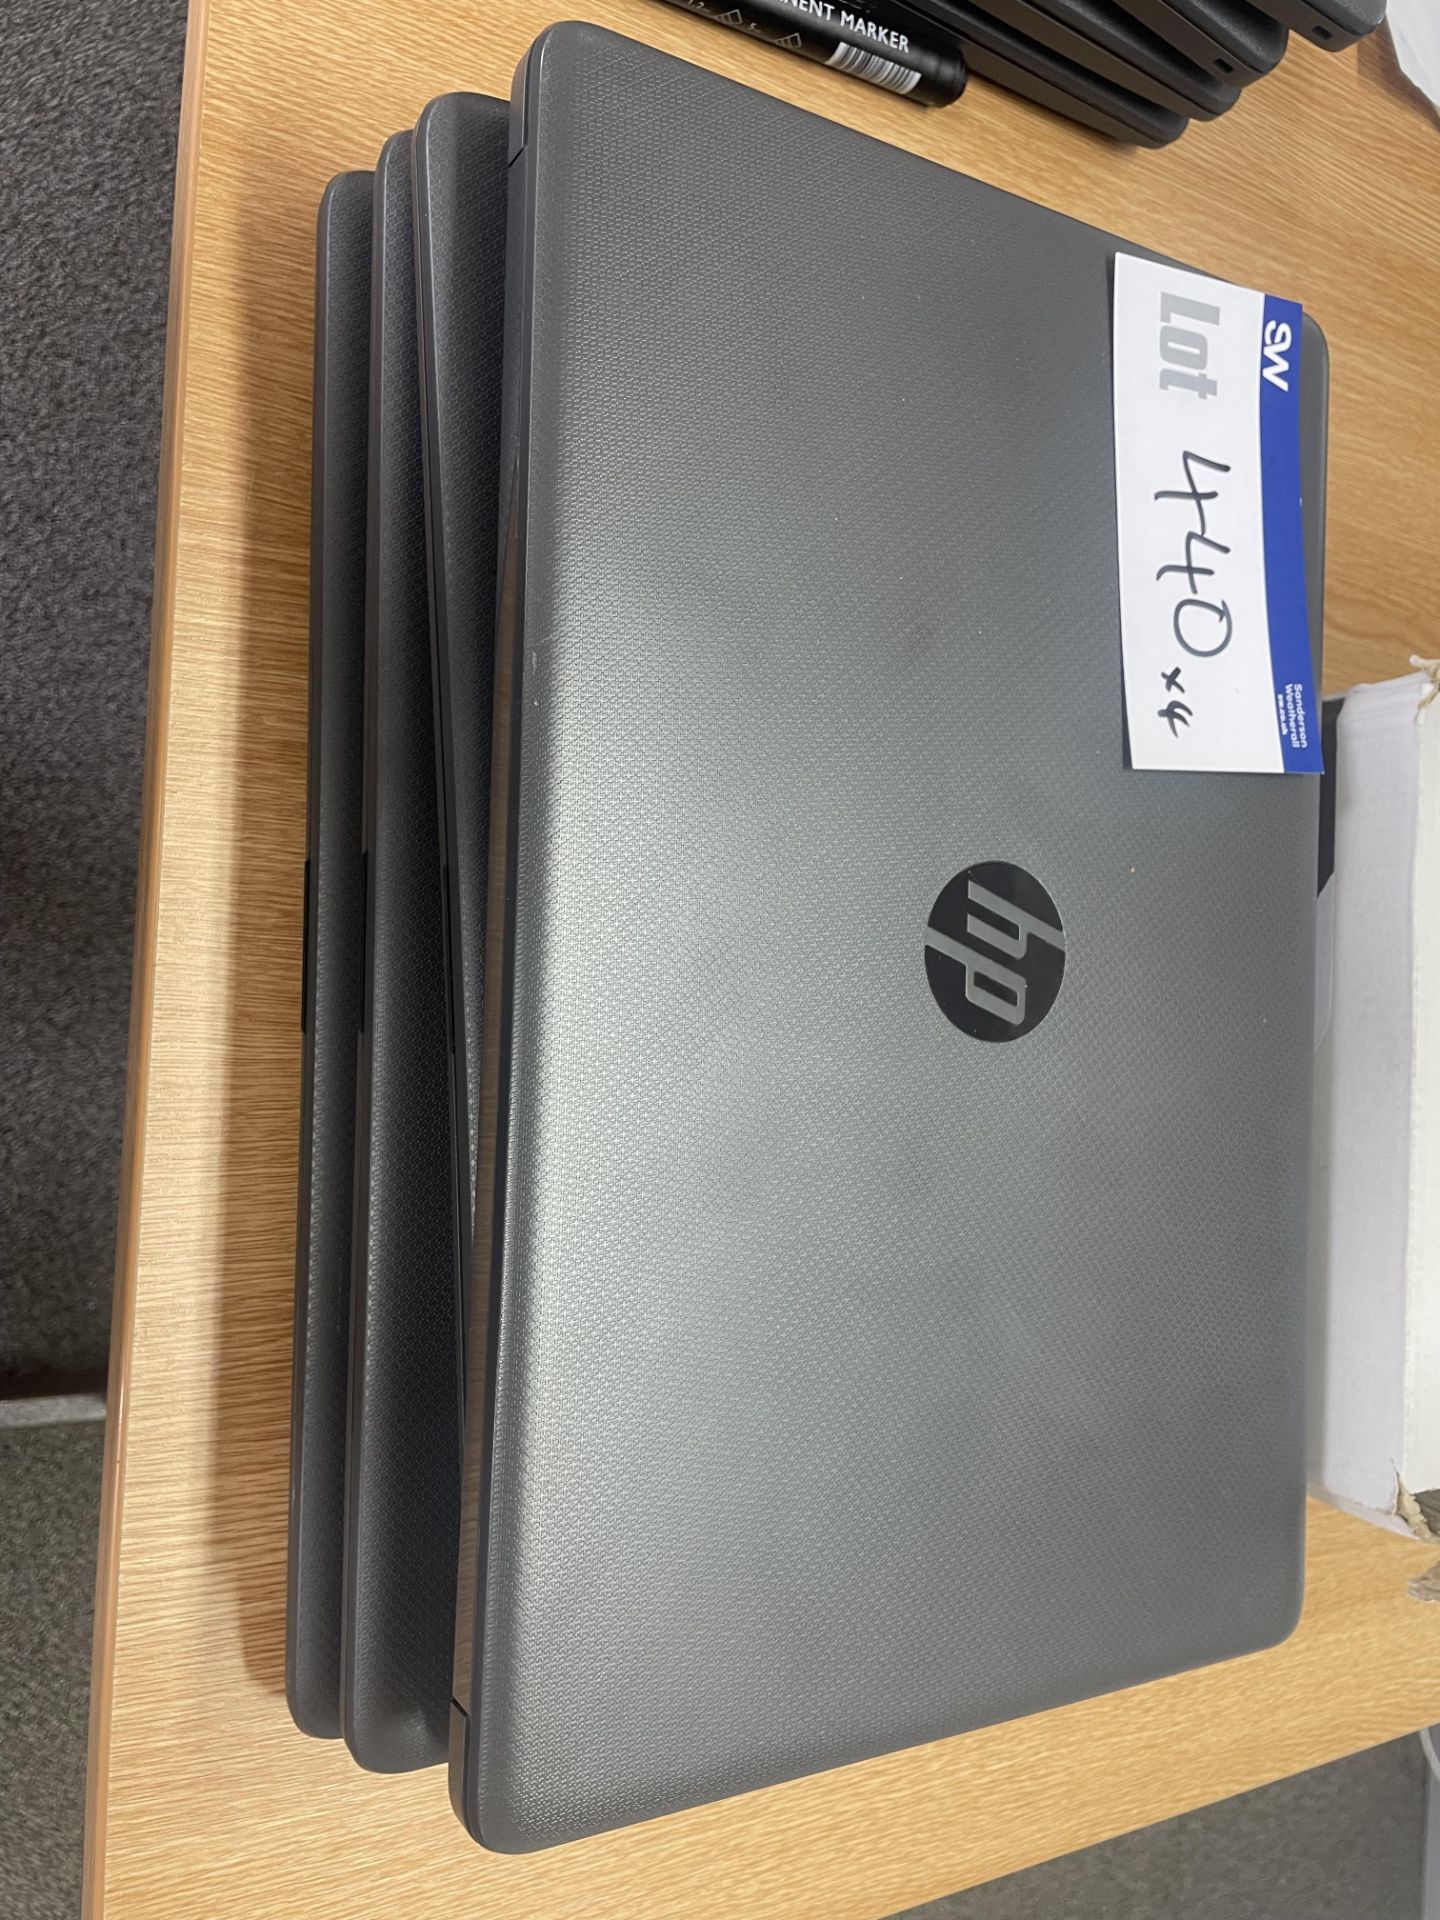 Four HP AMD Aflon Silver 3050U Laptops, with charg